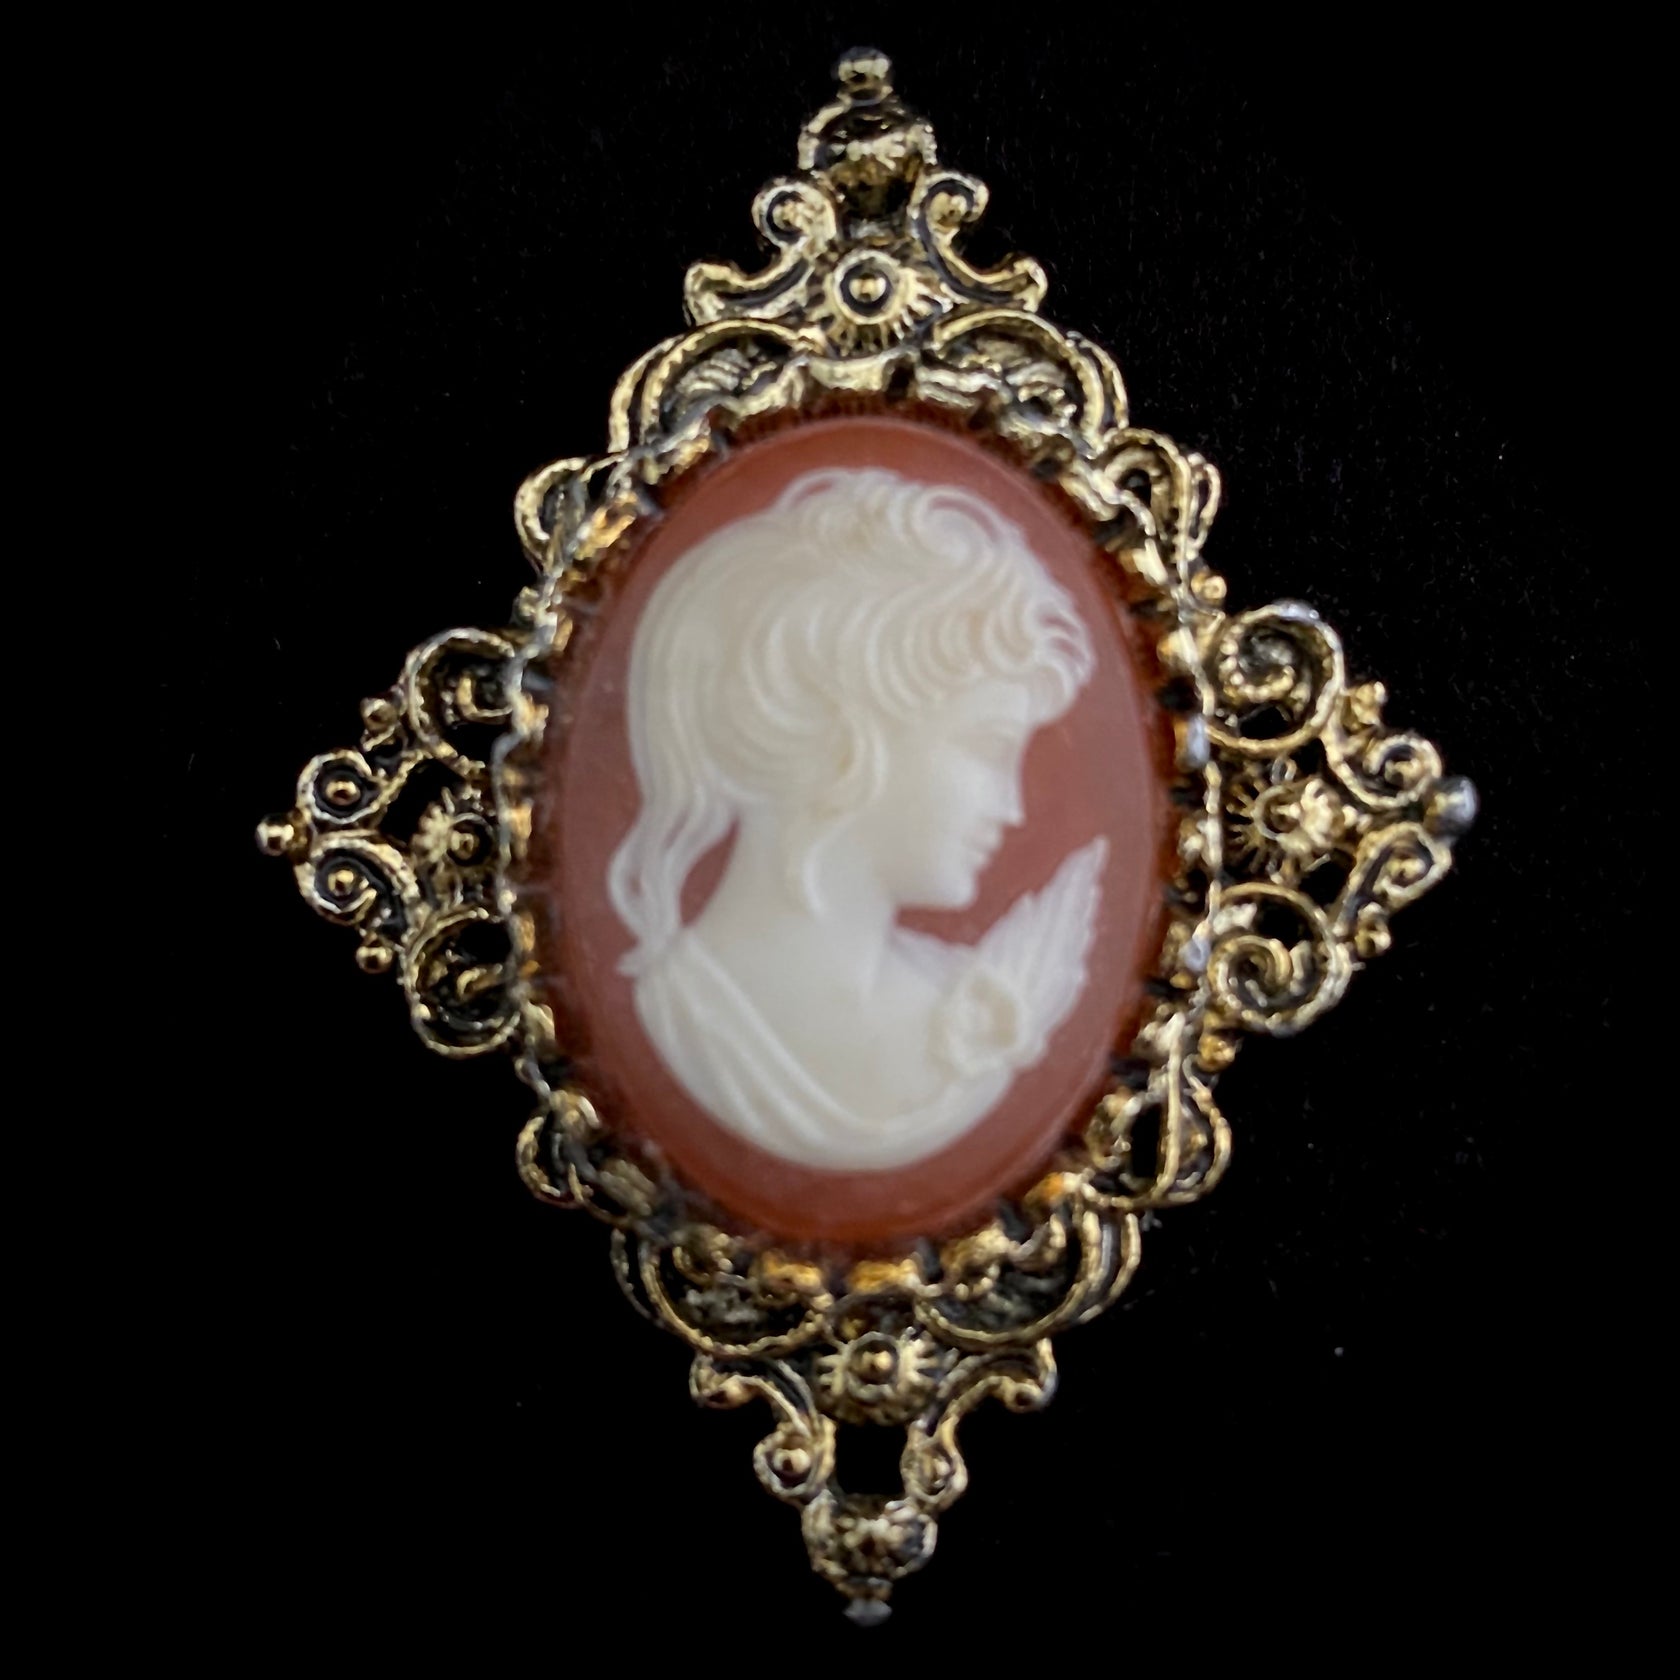 Late 70s/ Early 80s Gerry’s Cameo Brooch/Pendant – Retro Kandy Vintage